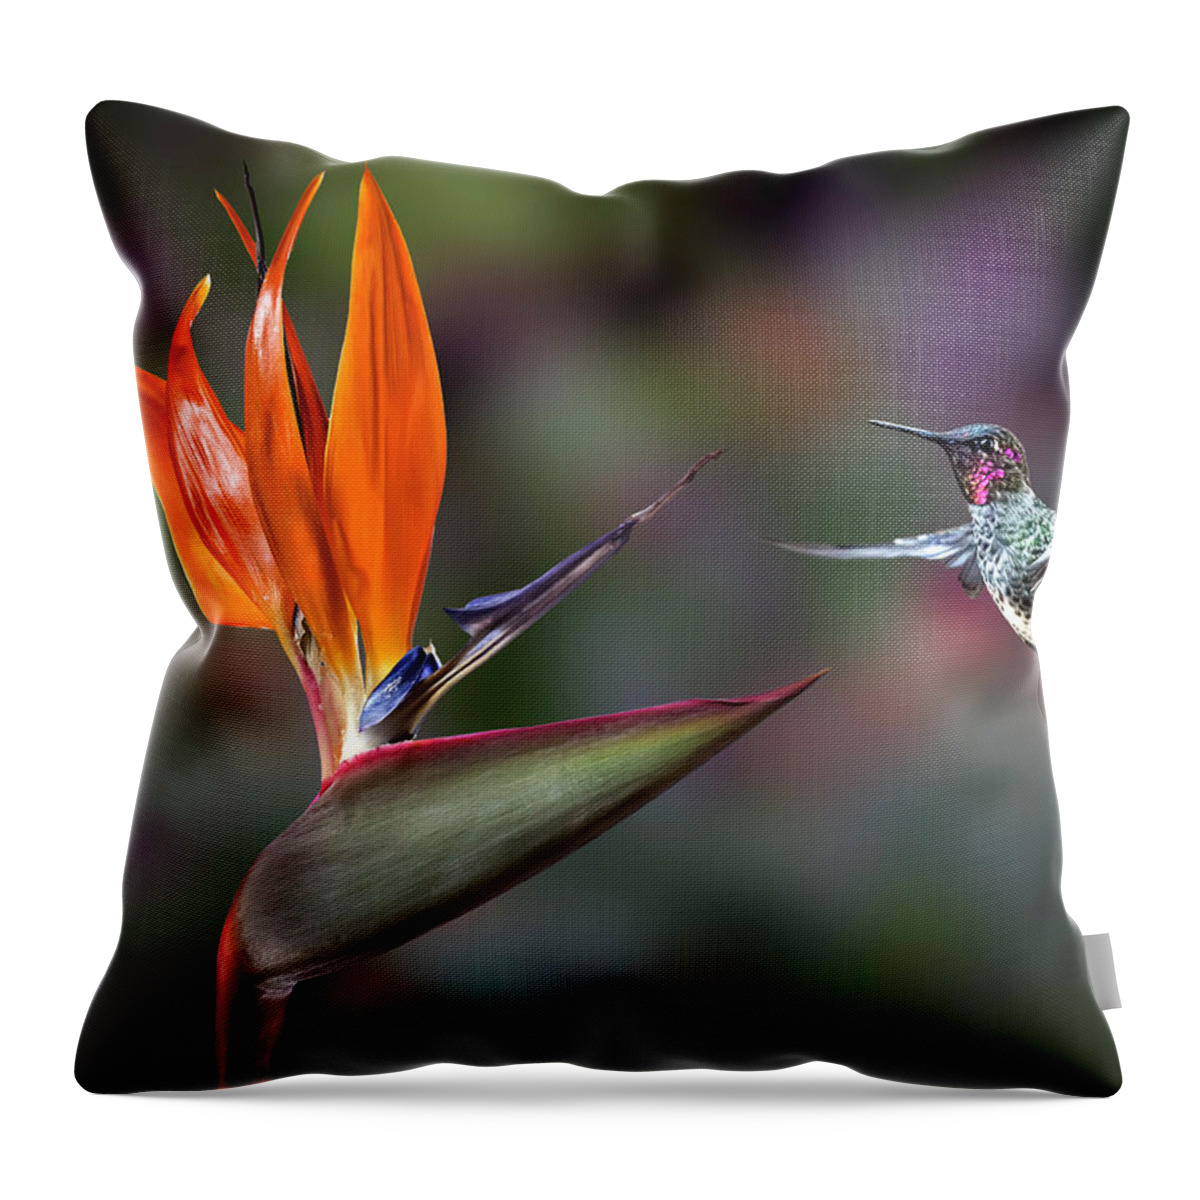 Hummingbird Throw Pillow featuring the photograph Hummingbird and Bird Of Paradise by Endre Balogh